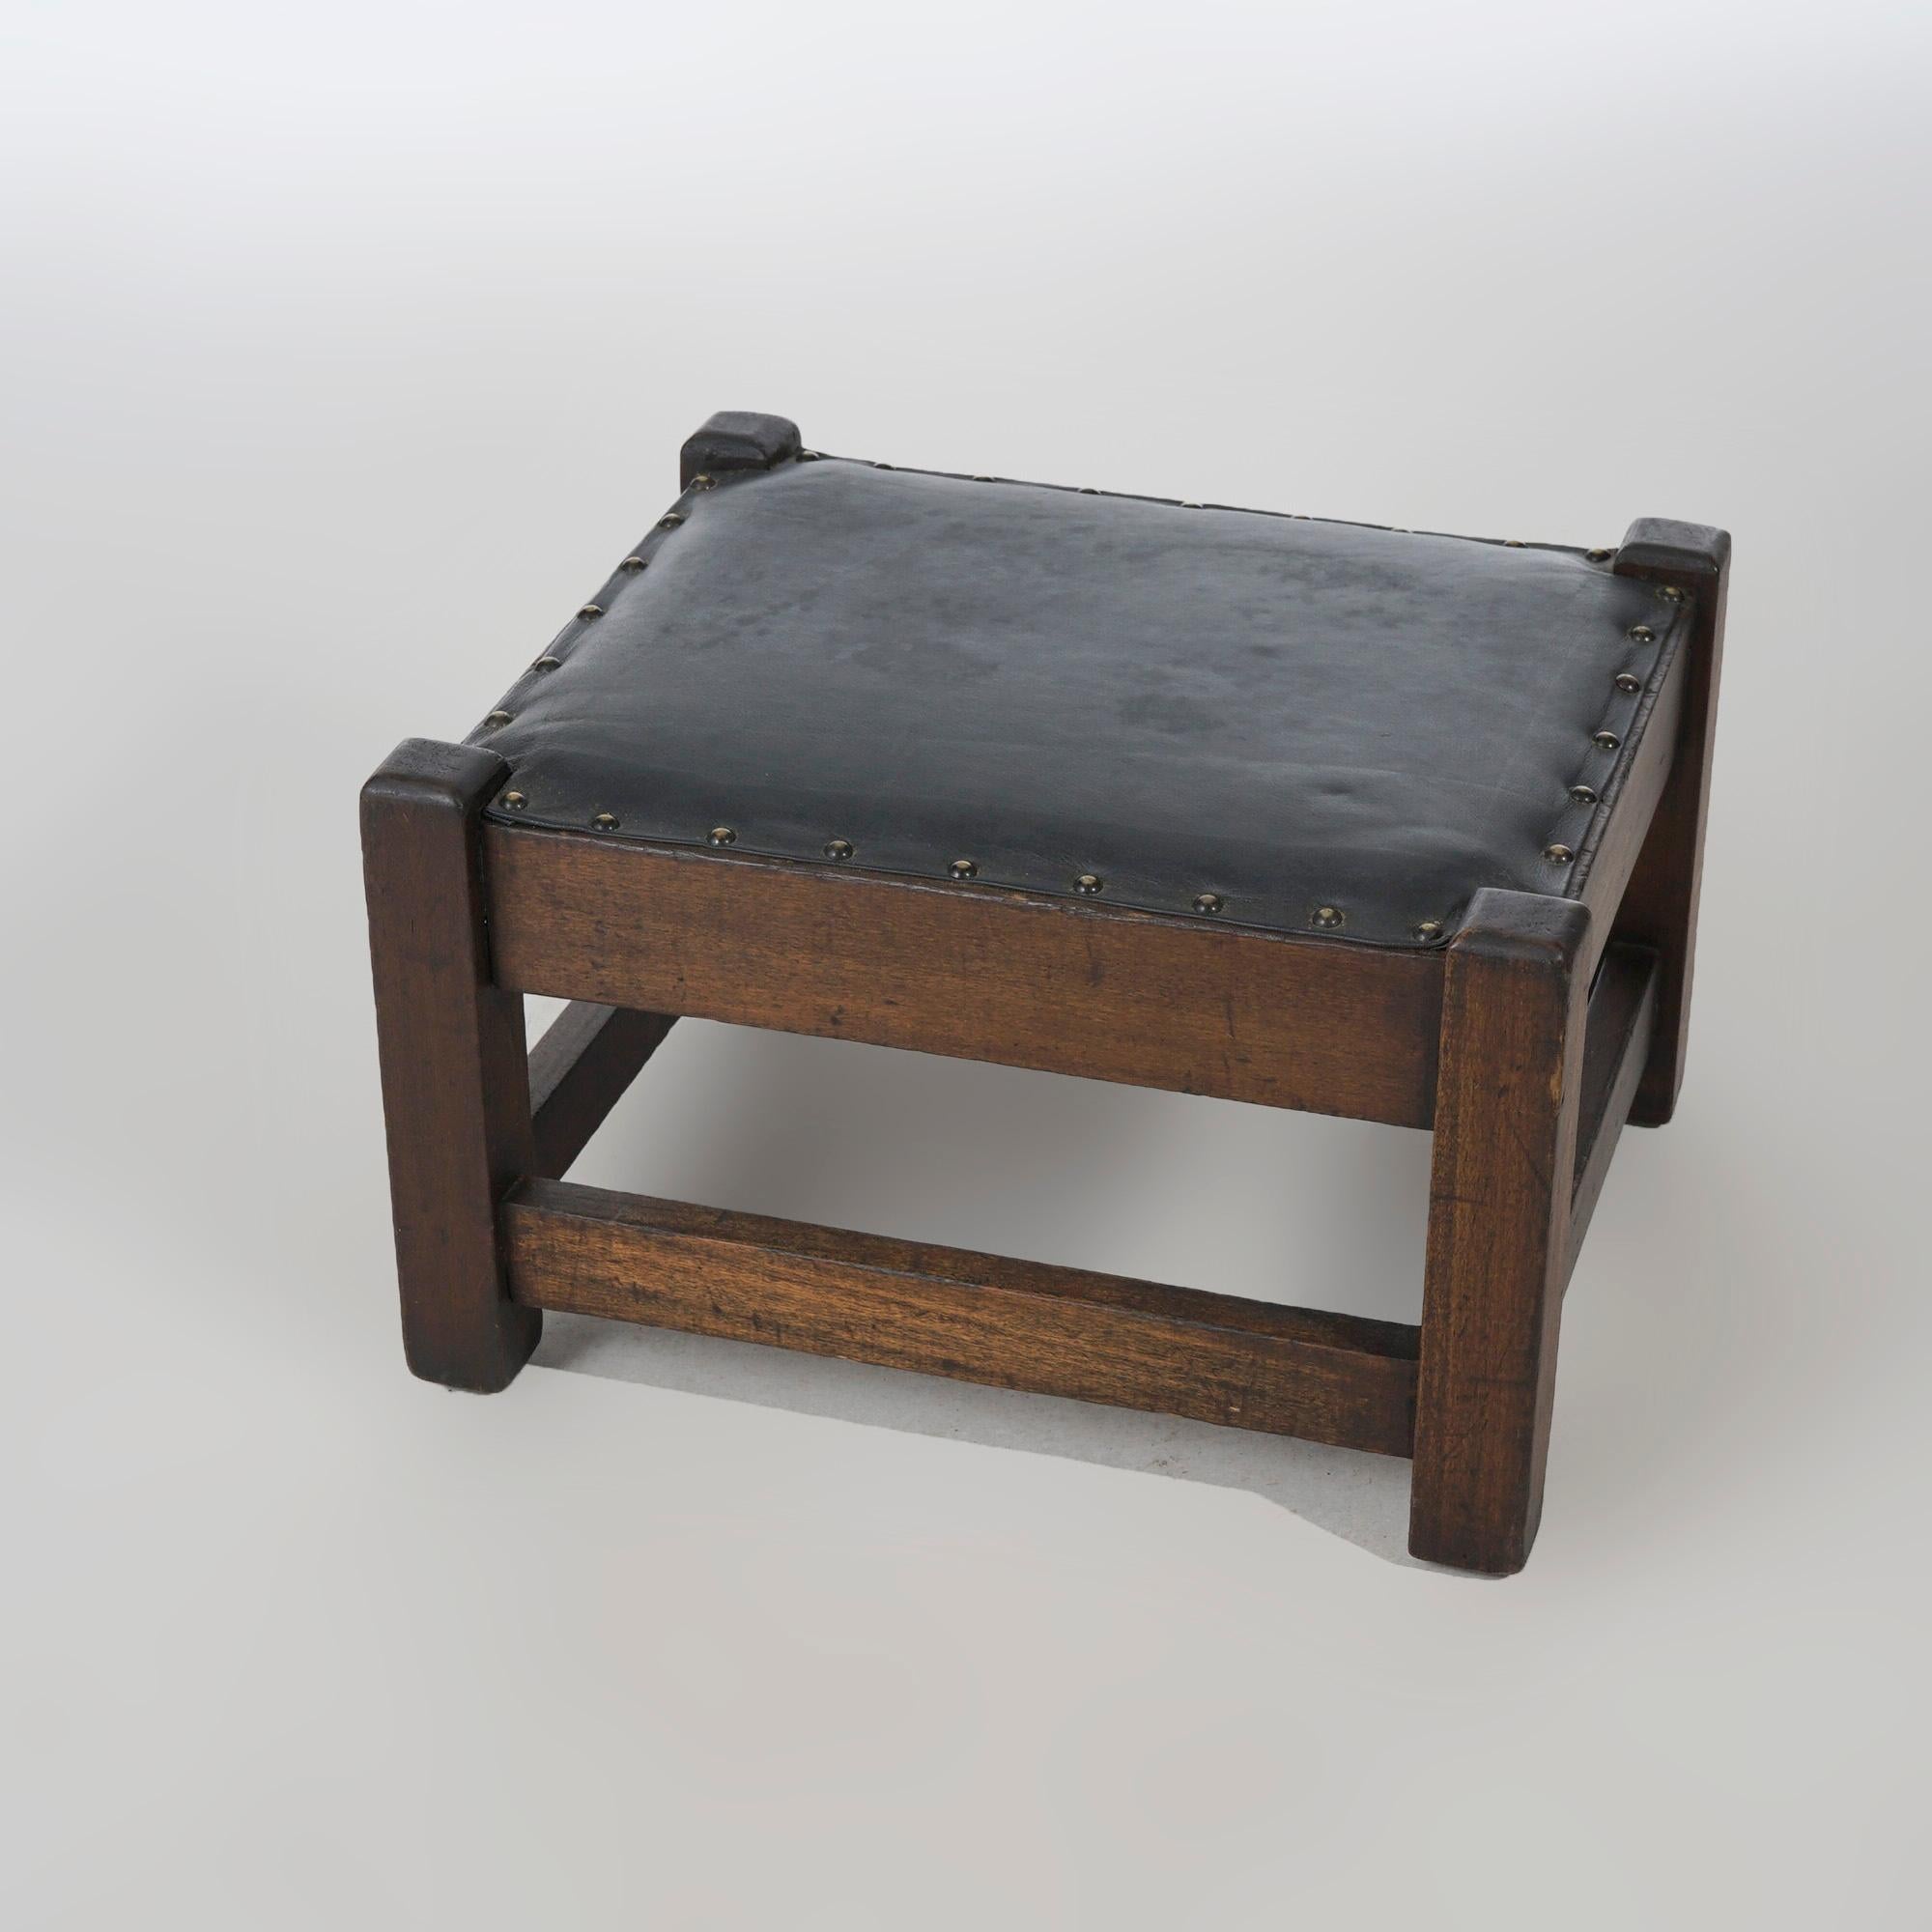 An antique Arts and Crafts Mission foot stool offers mahogany construction with square and straight legs, c1910

Measures- 11''H x 18.25''W x 15.5''D

Catalogue Note: Ask about DISCOUNTED DELIVERY RATES available to most regions within 1,500 miles